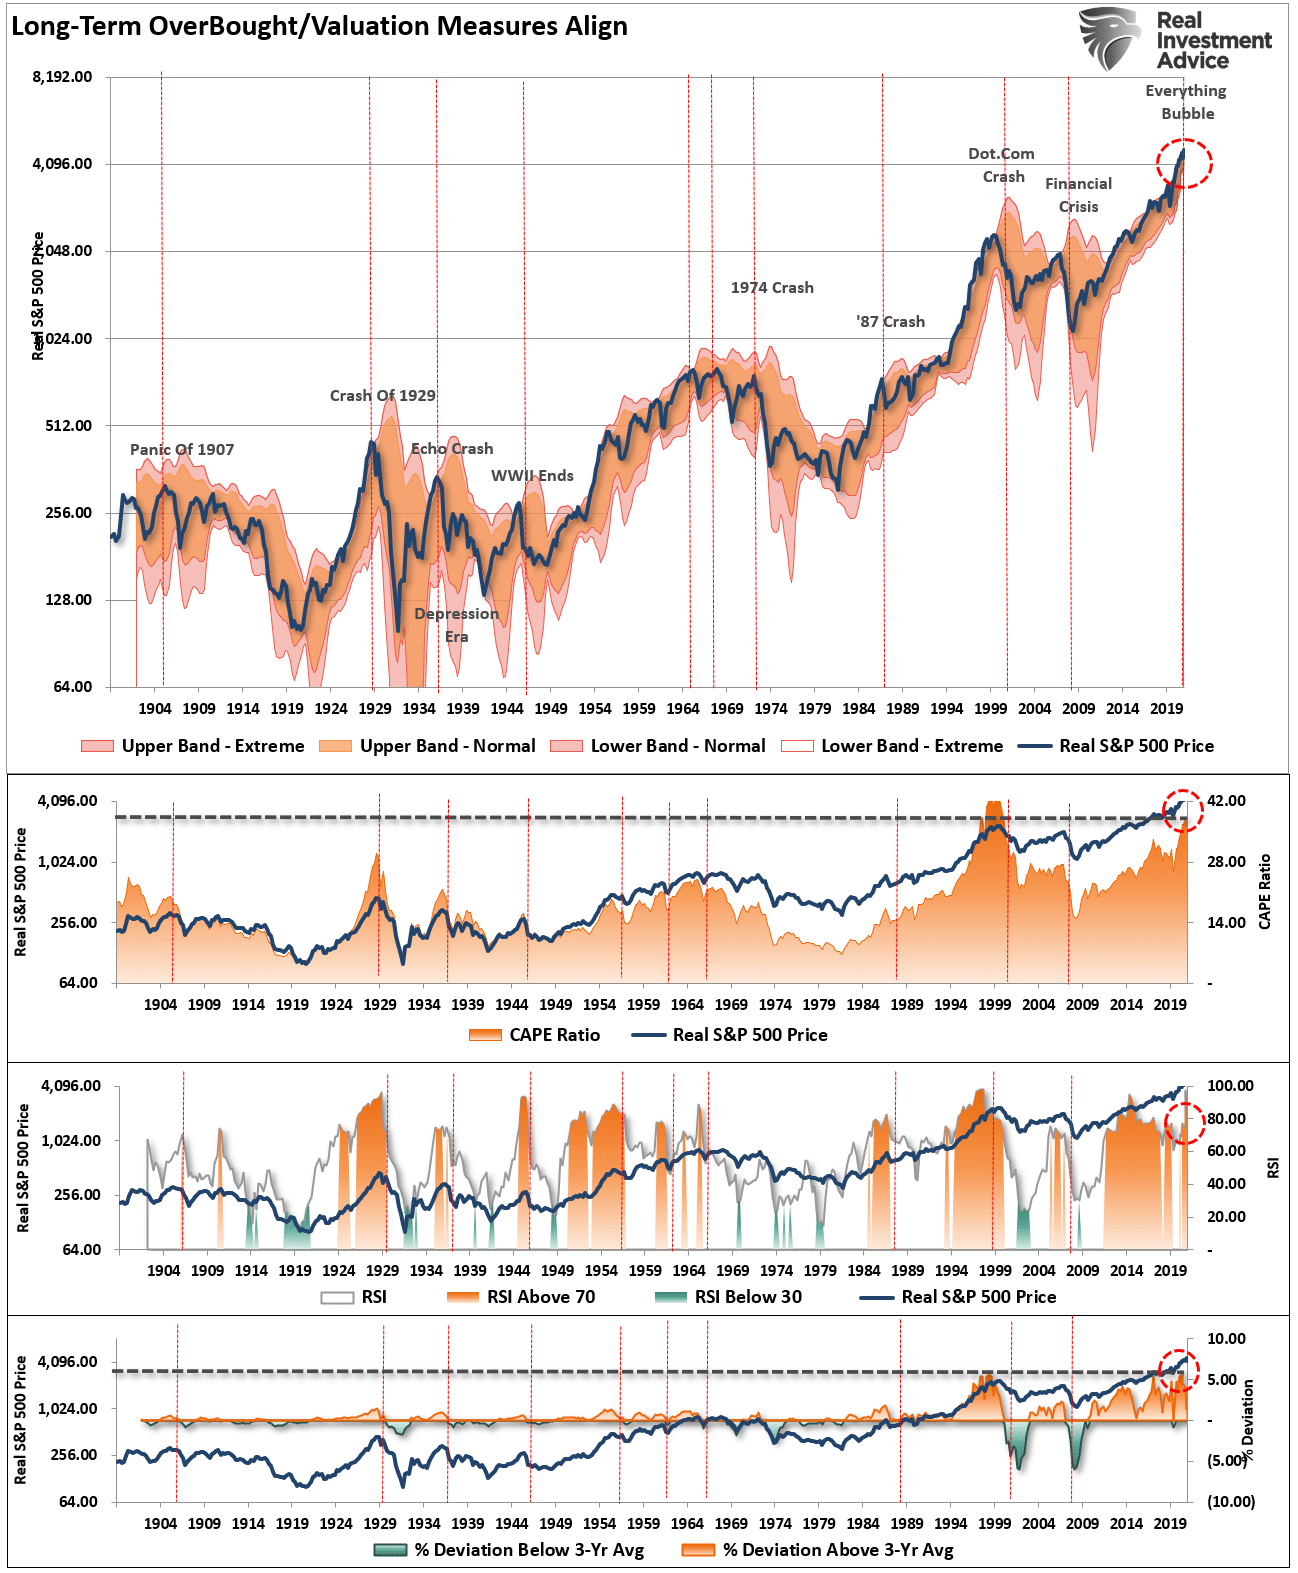 Long-Term OverBought/Valuation Measutes Align